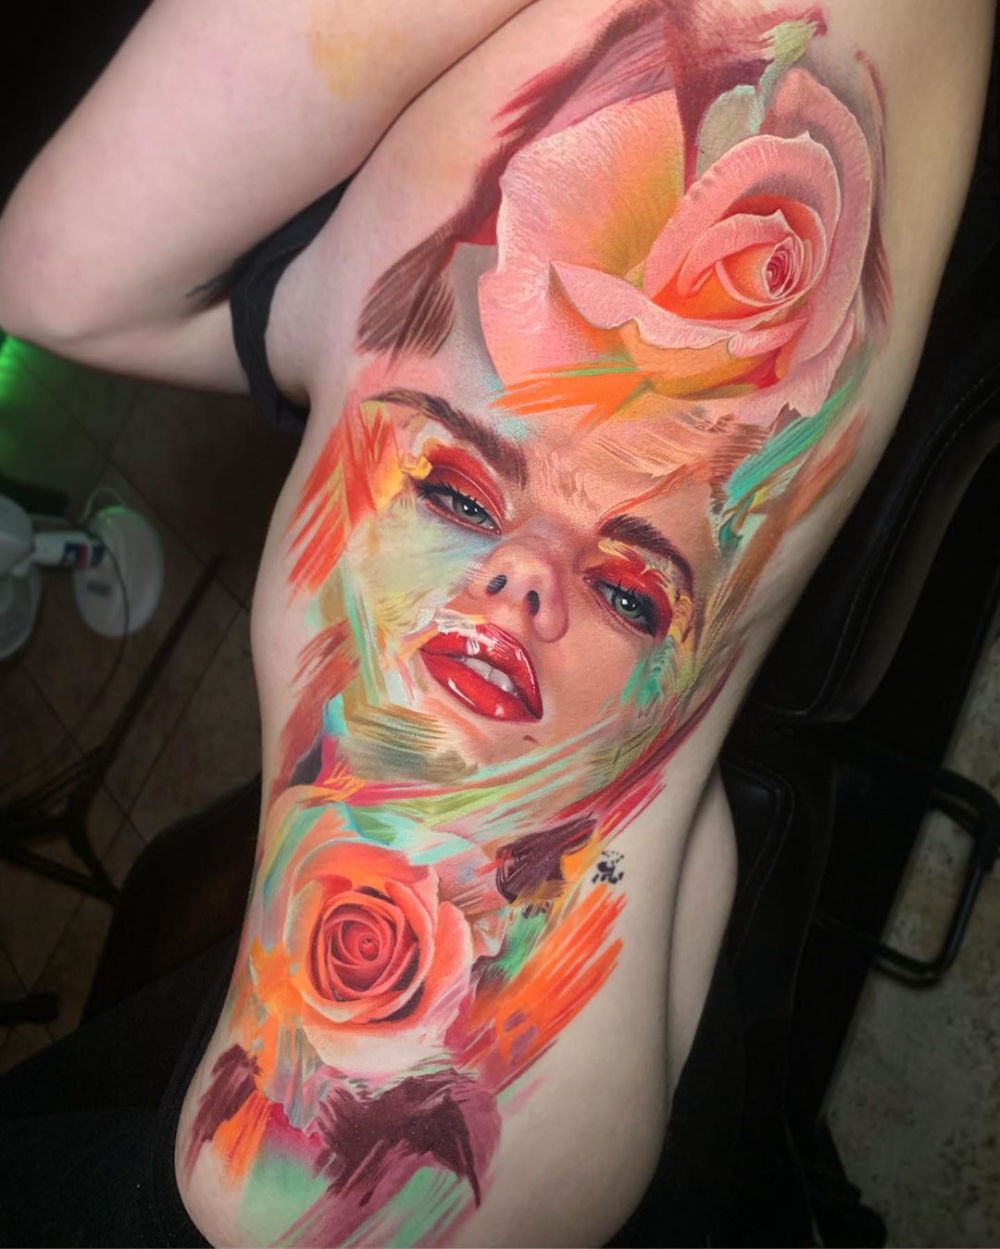 Portrait With Colorful Brushstrokes & Roses